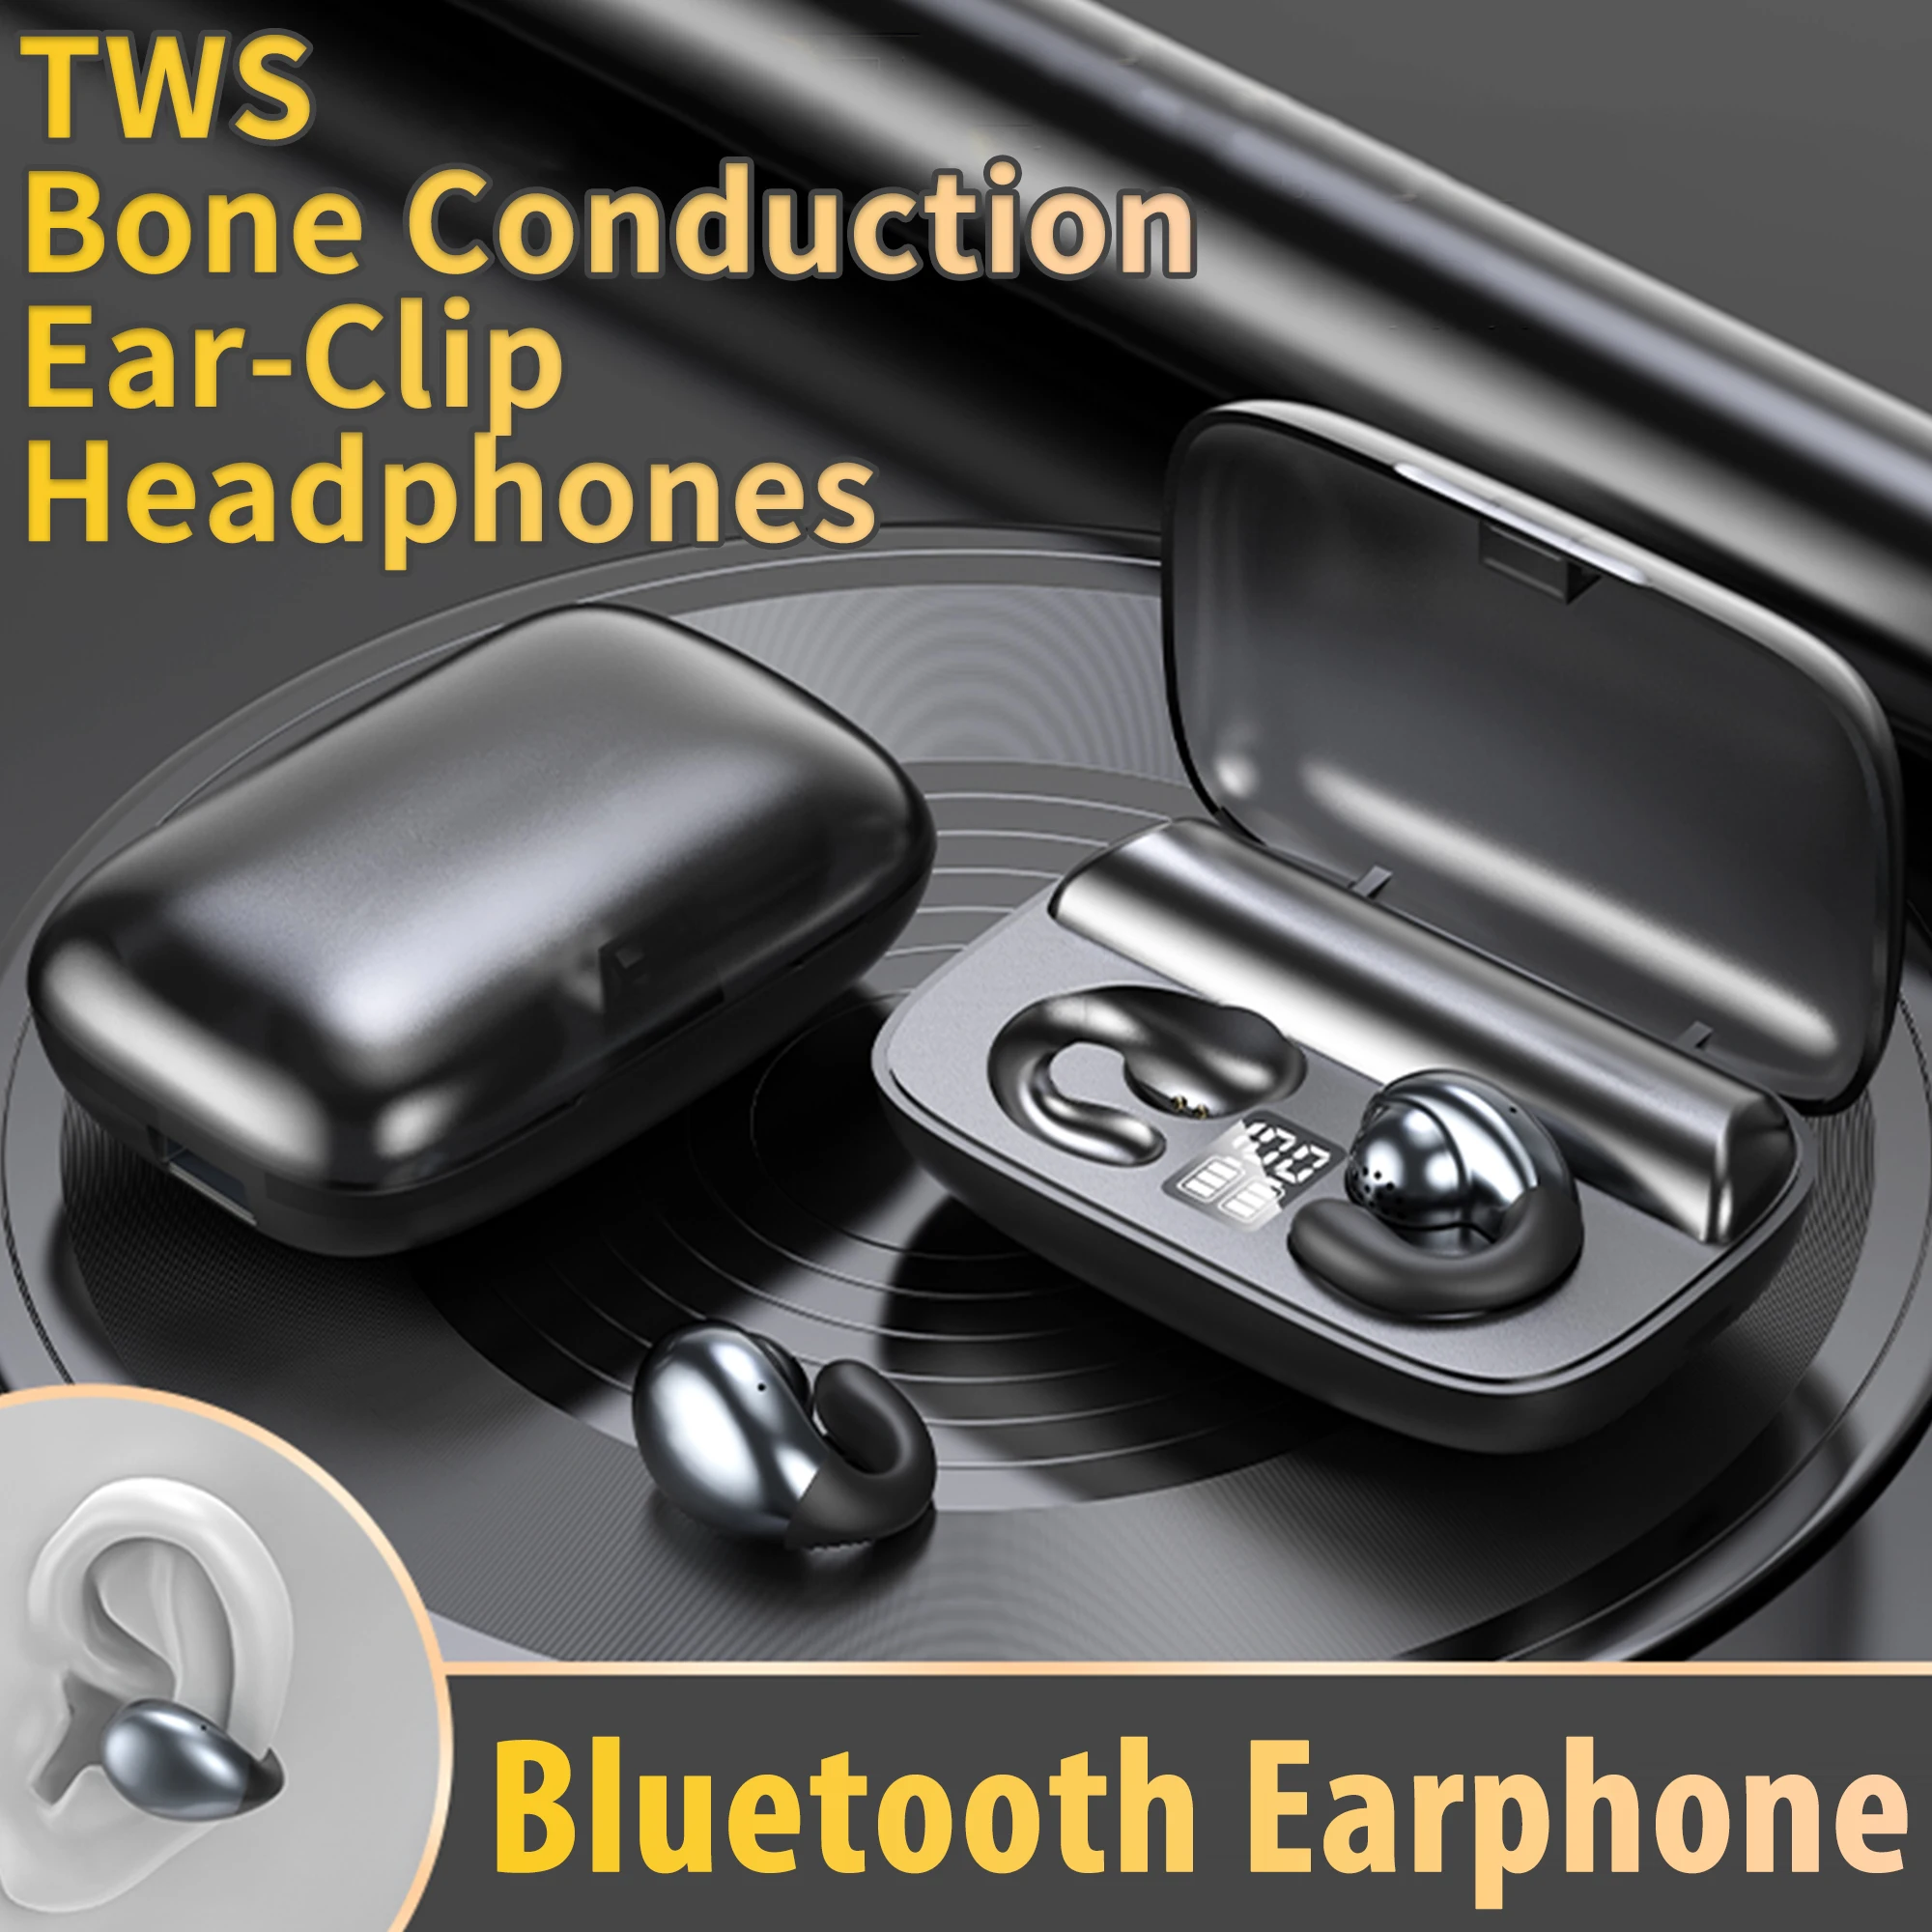 TWS Wireless Bone Conduction Bluetooth Headsets Ear Clip Wireless Headphones with Mic 9D HIFI Stereo Music Earphone for iphone